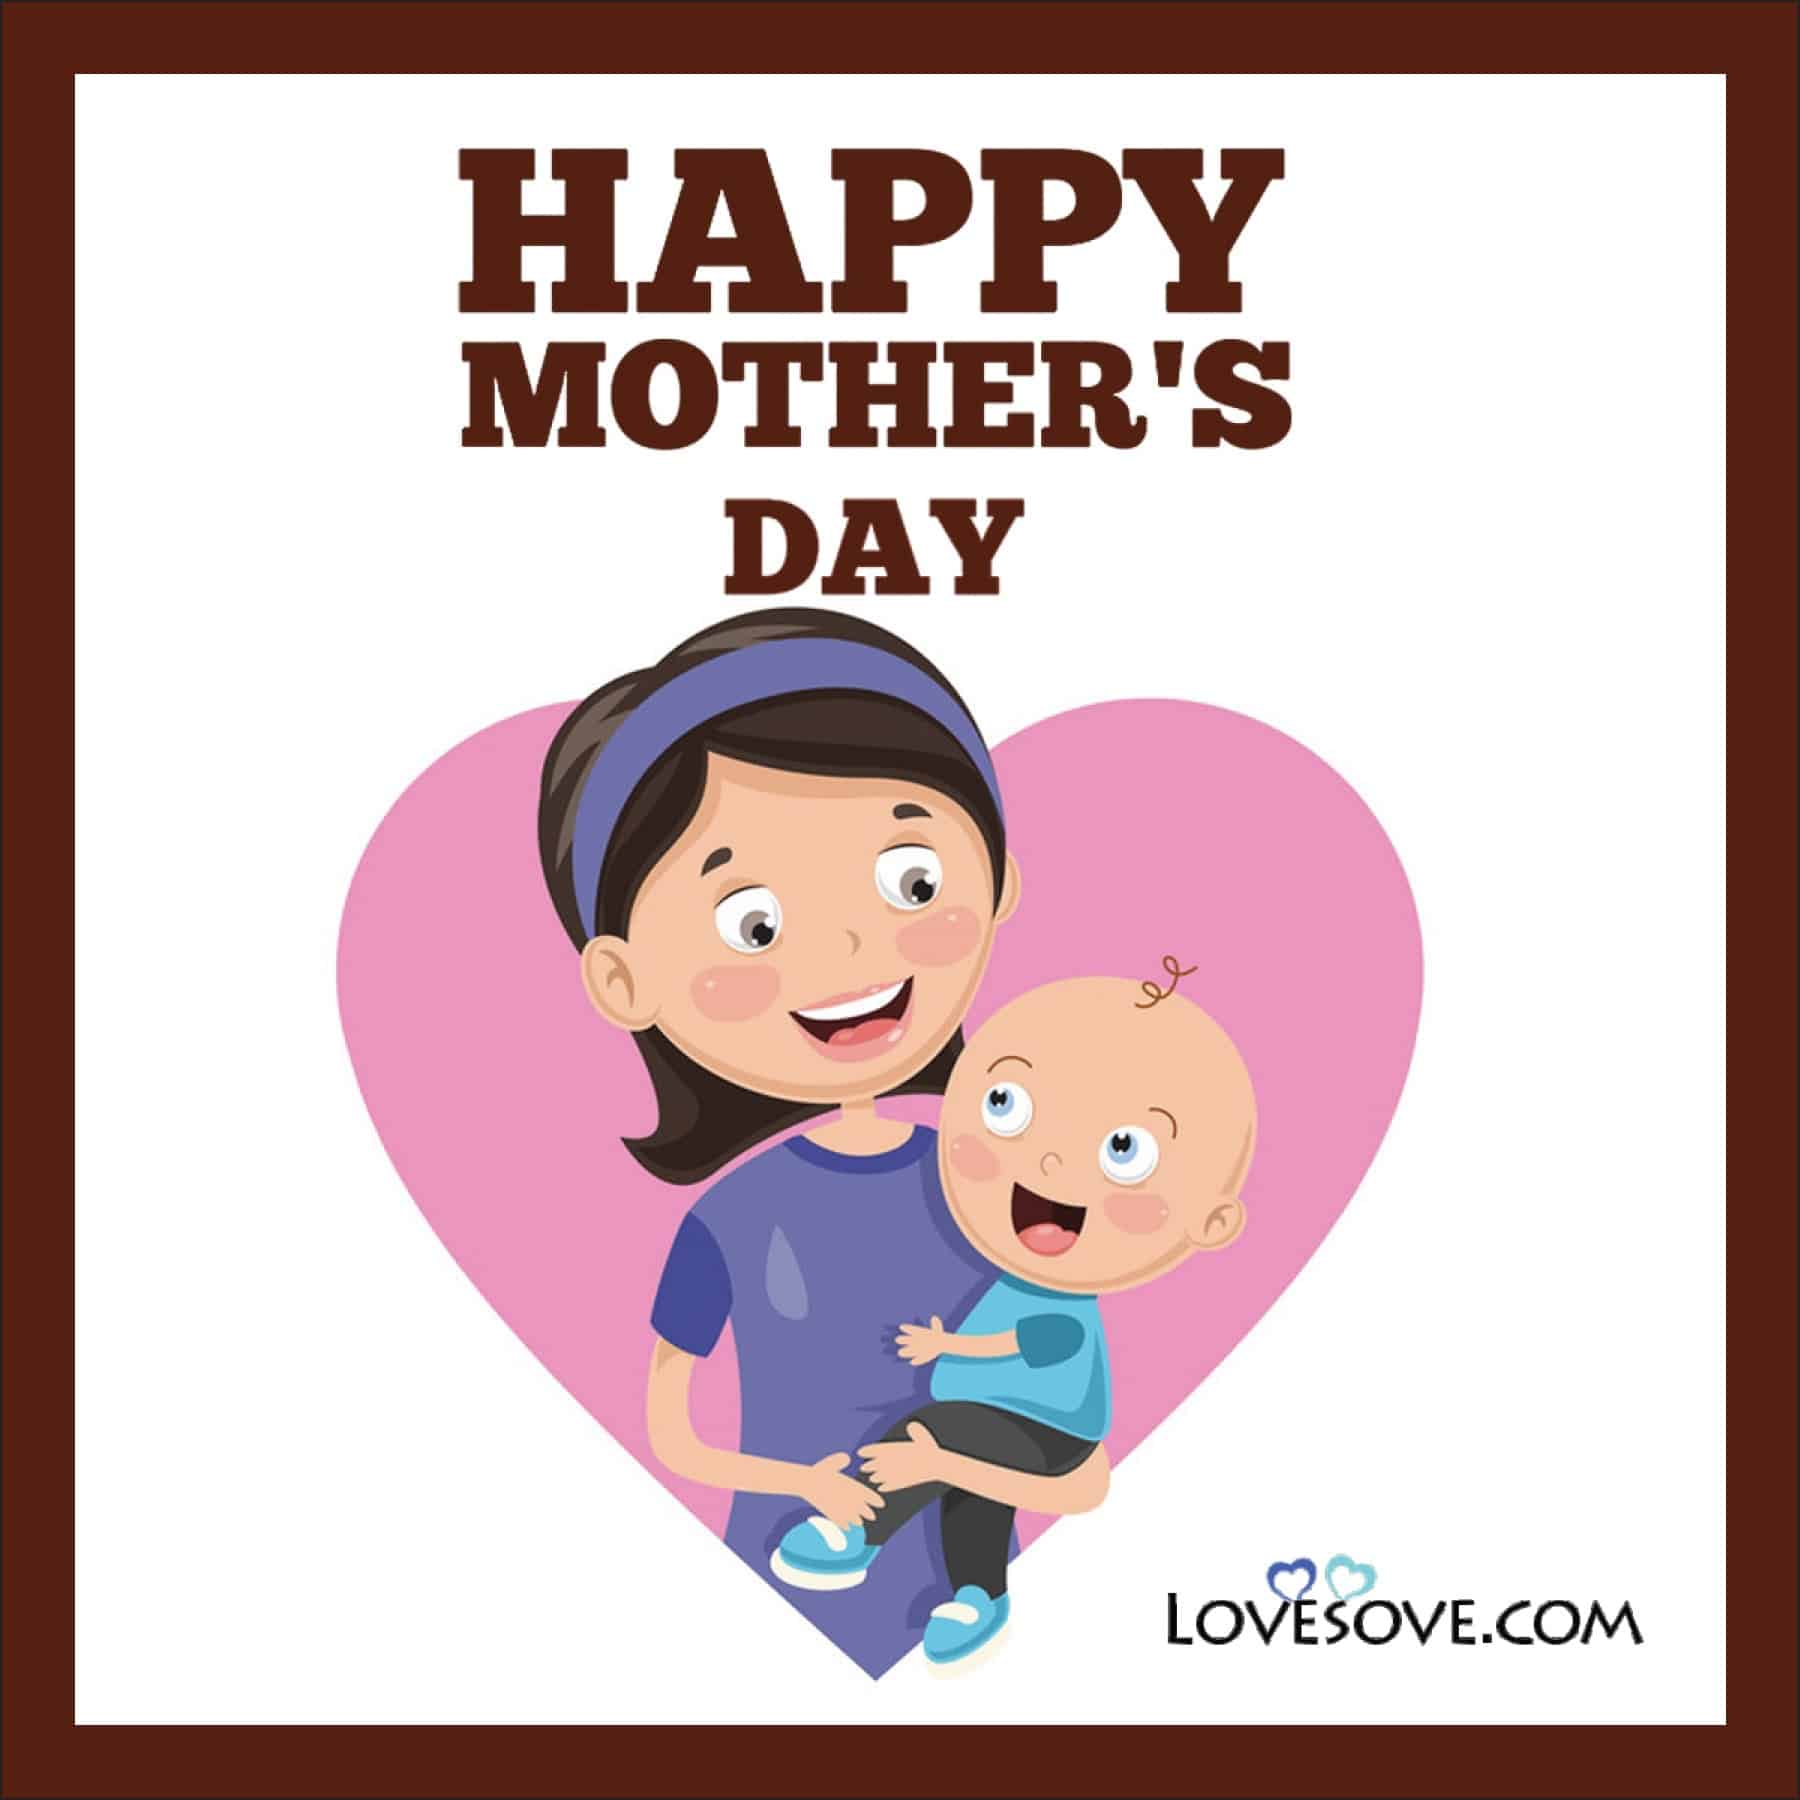 mother’s-day-cards-Lovesove